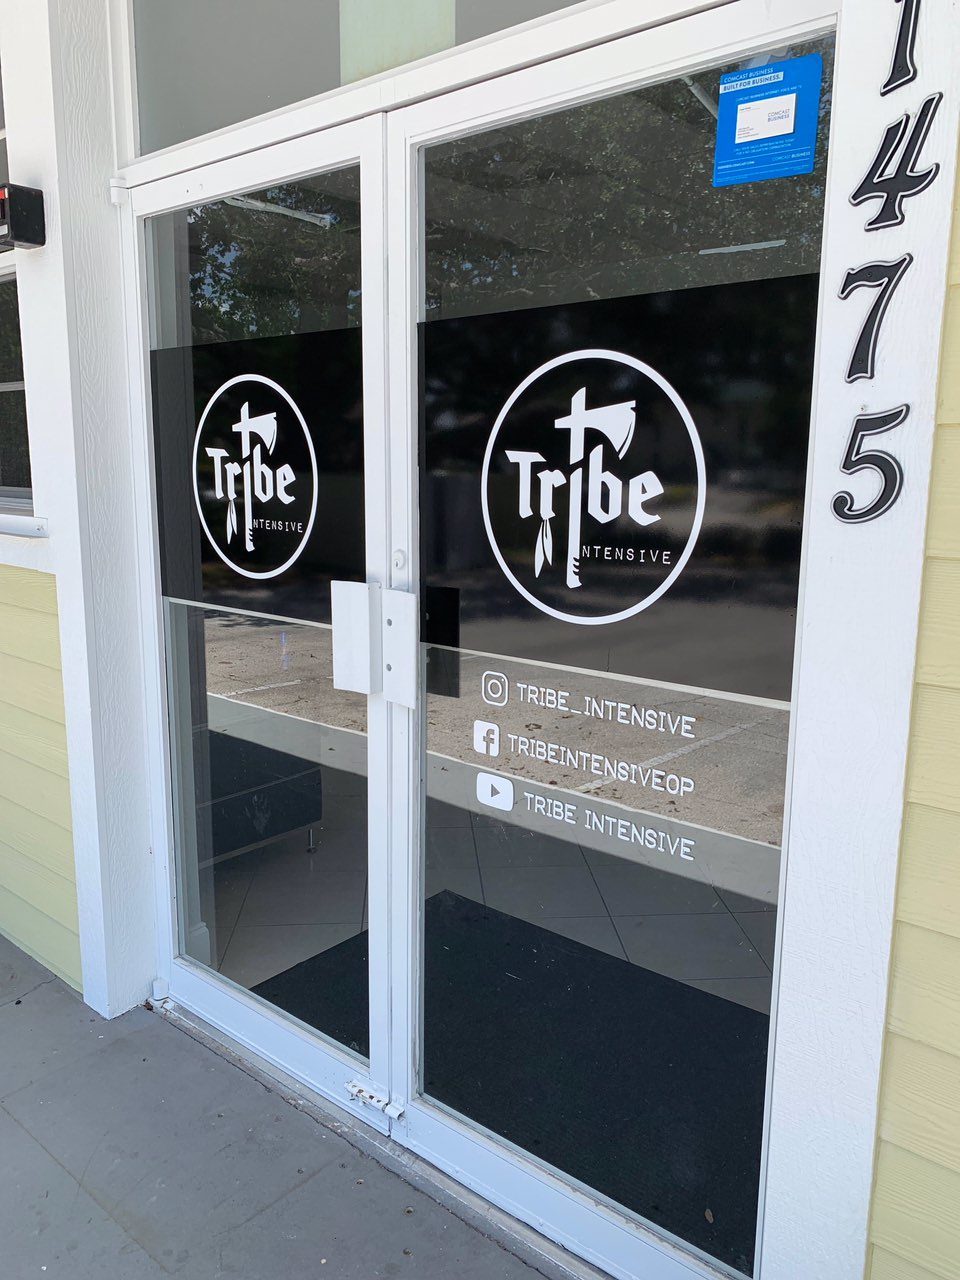 Tribe Intensive